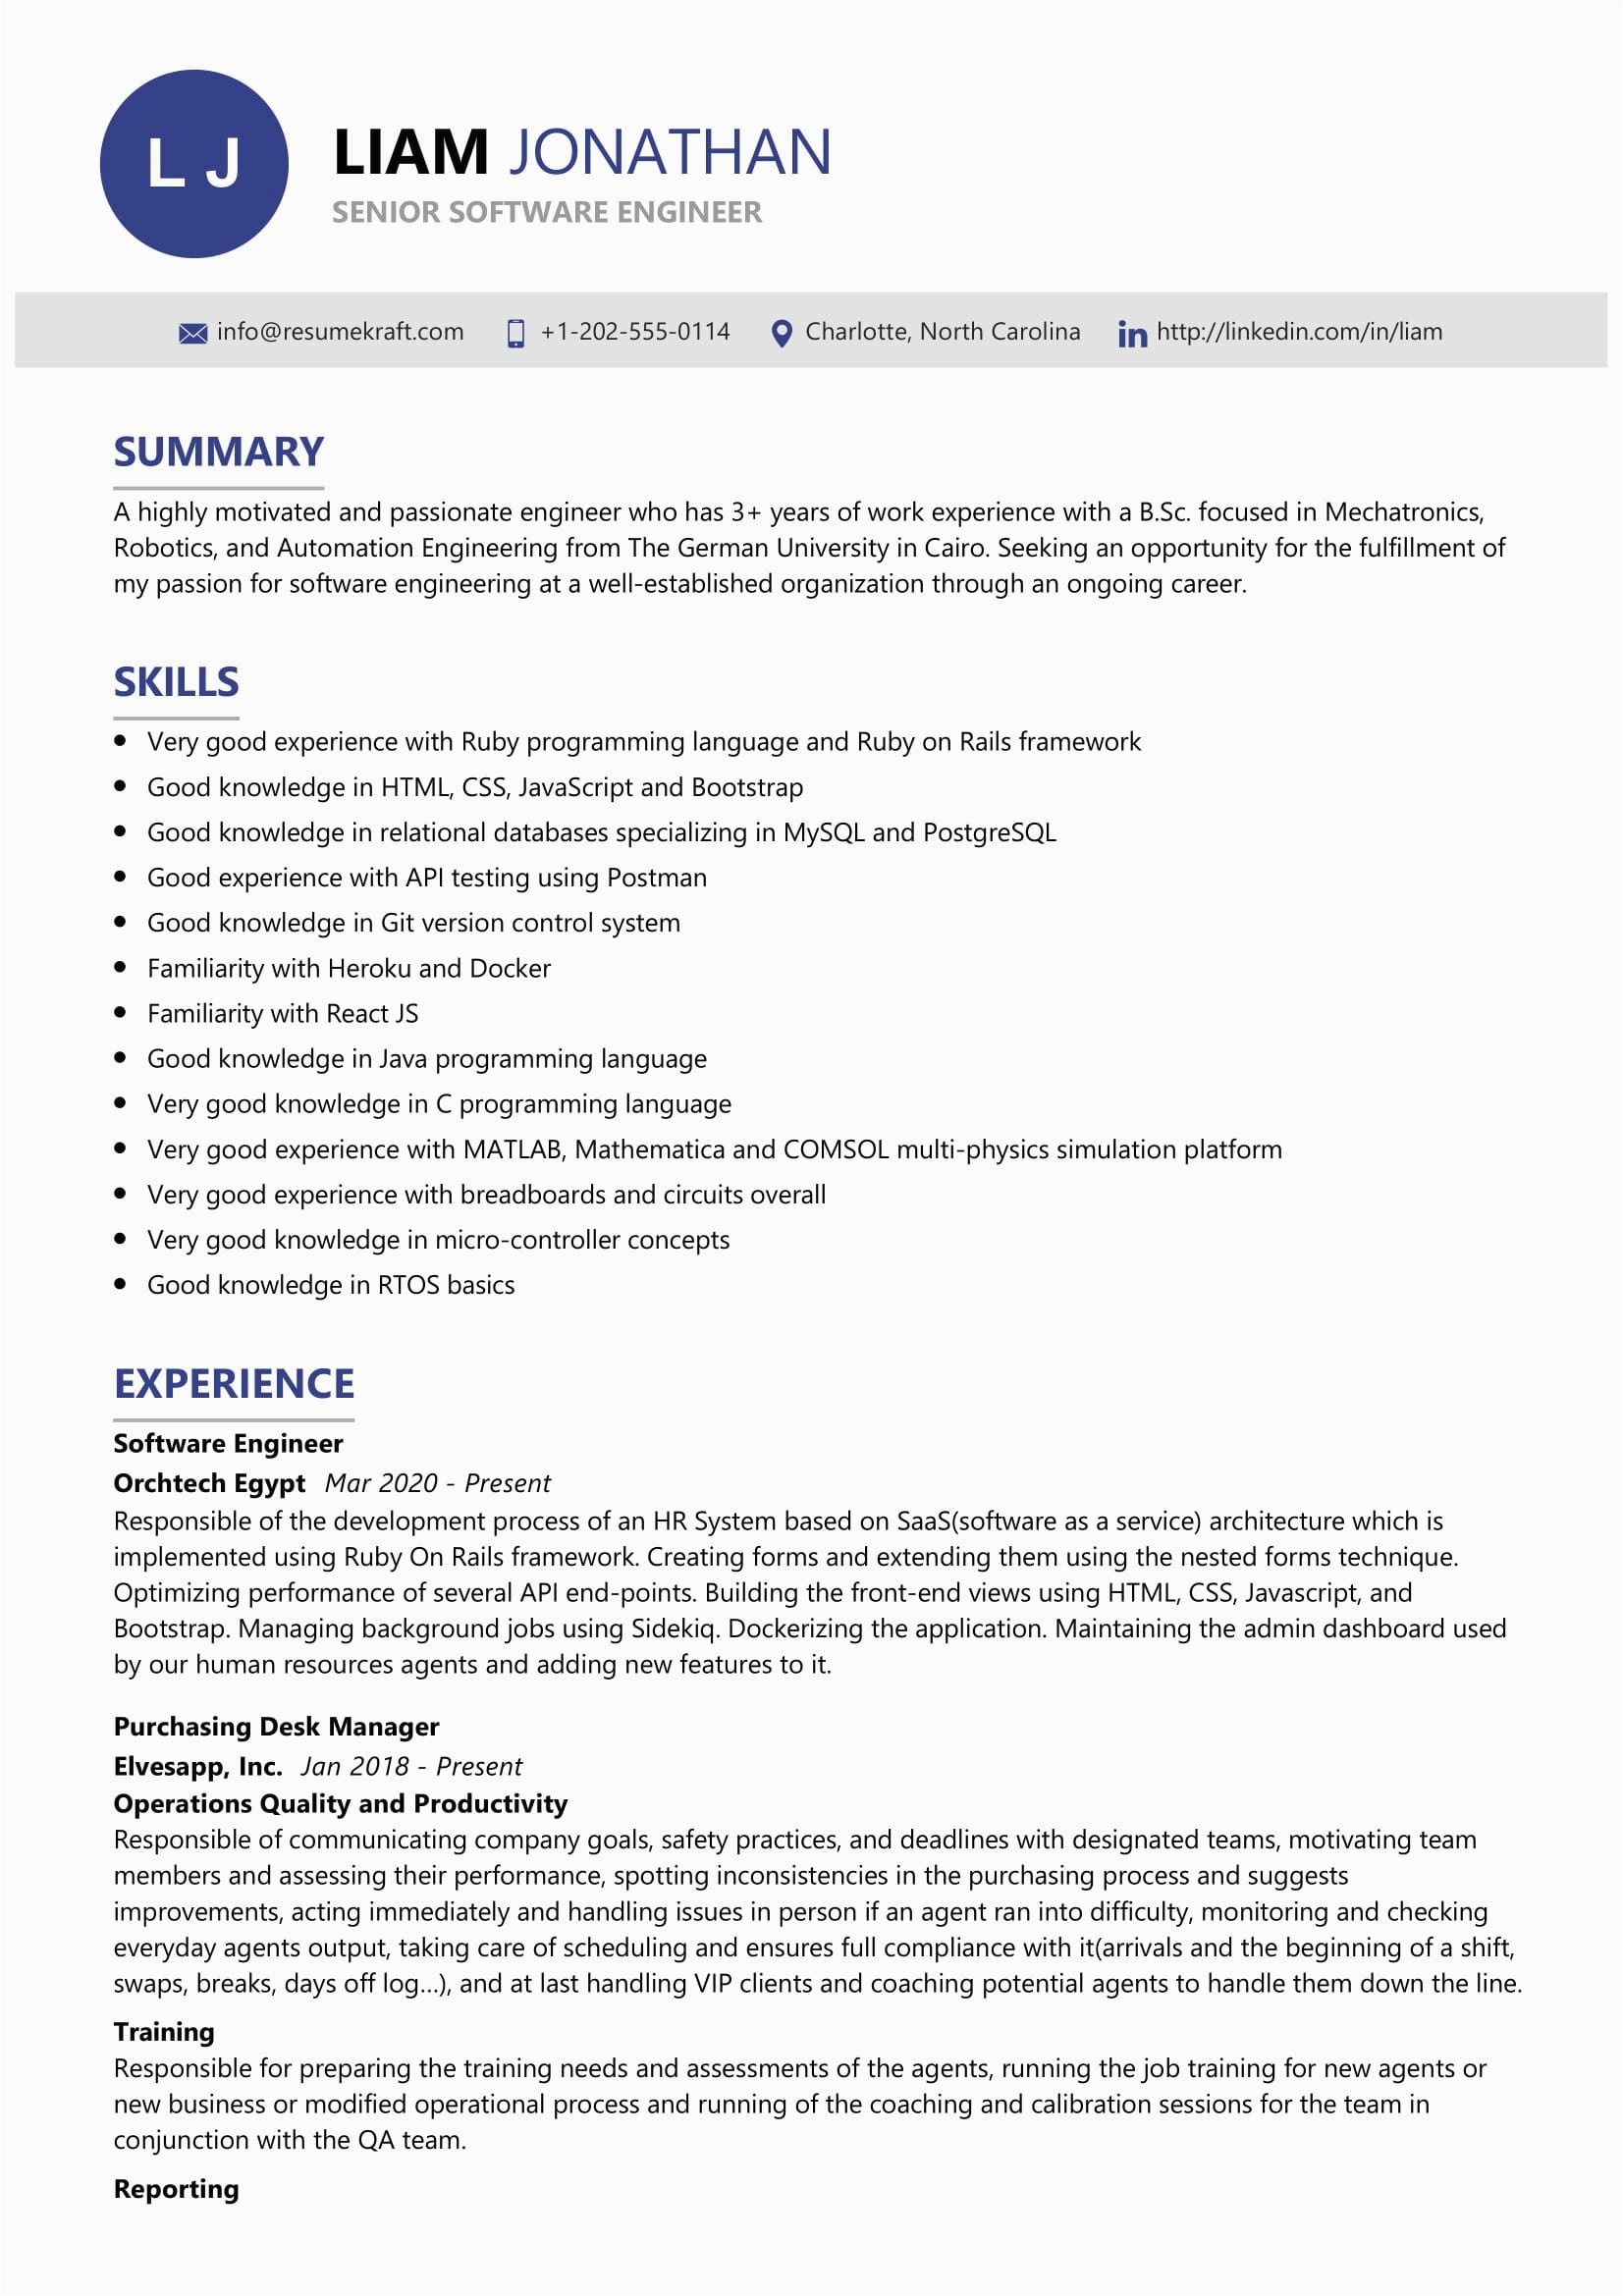 Resume Samples for Experienced software Professionals Senior software Engineer Resume Sample 2021